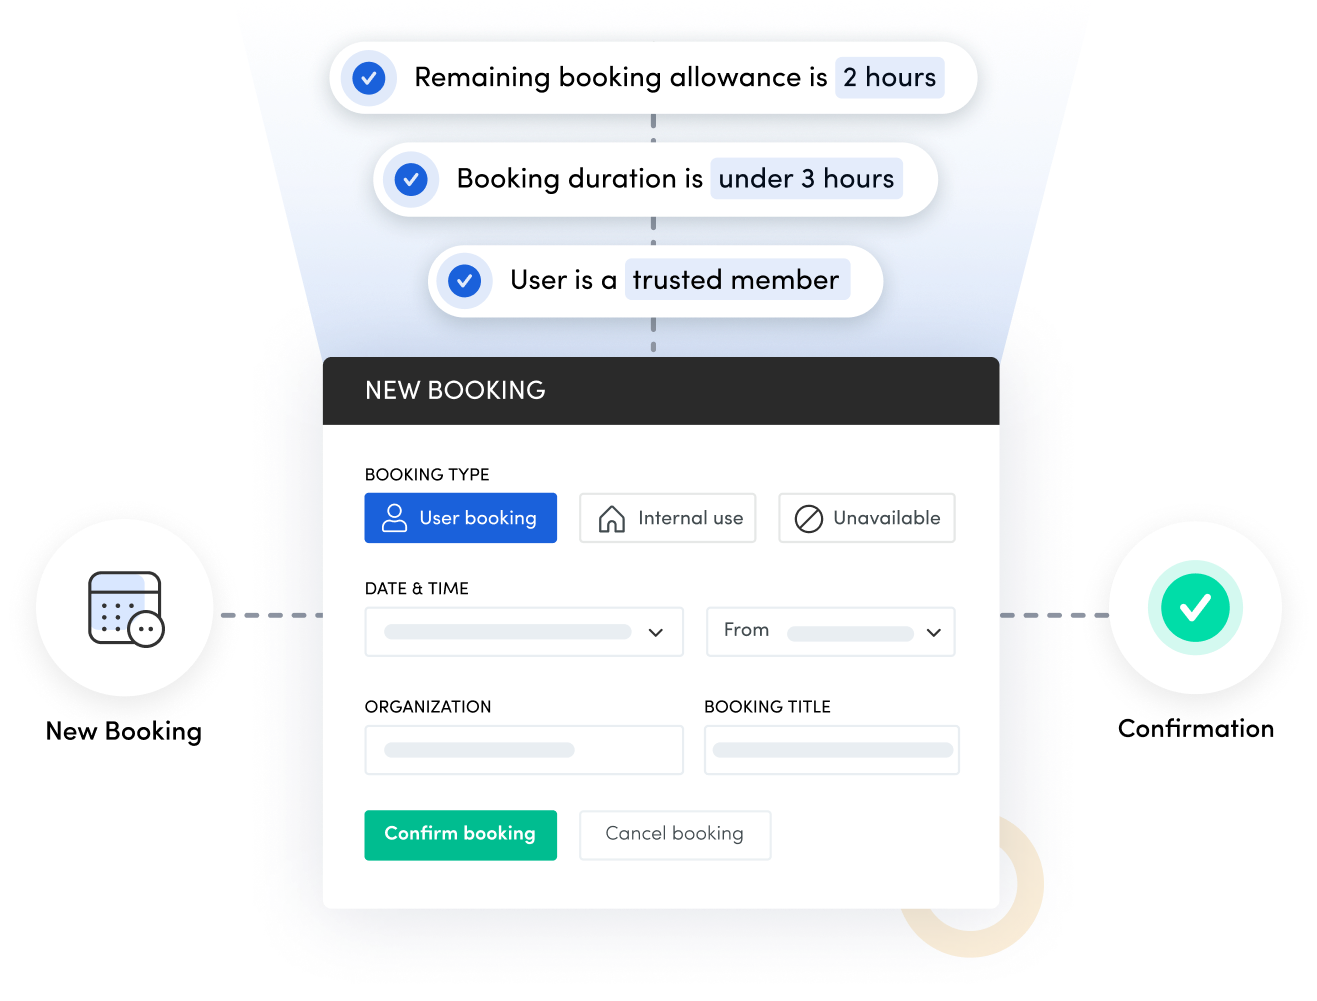 Skedda allows organizations to automate the tricky, time-consuming parts of managing their bookable spaces, so that they're free to focus on what matters.